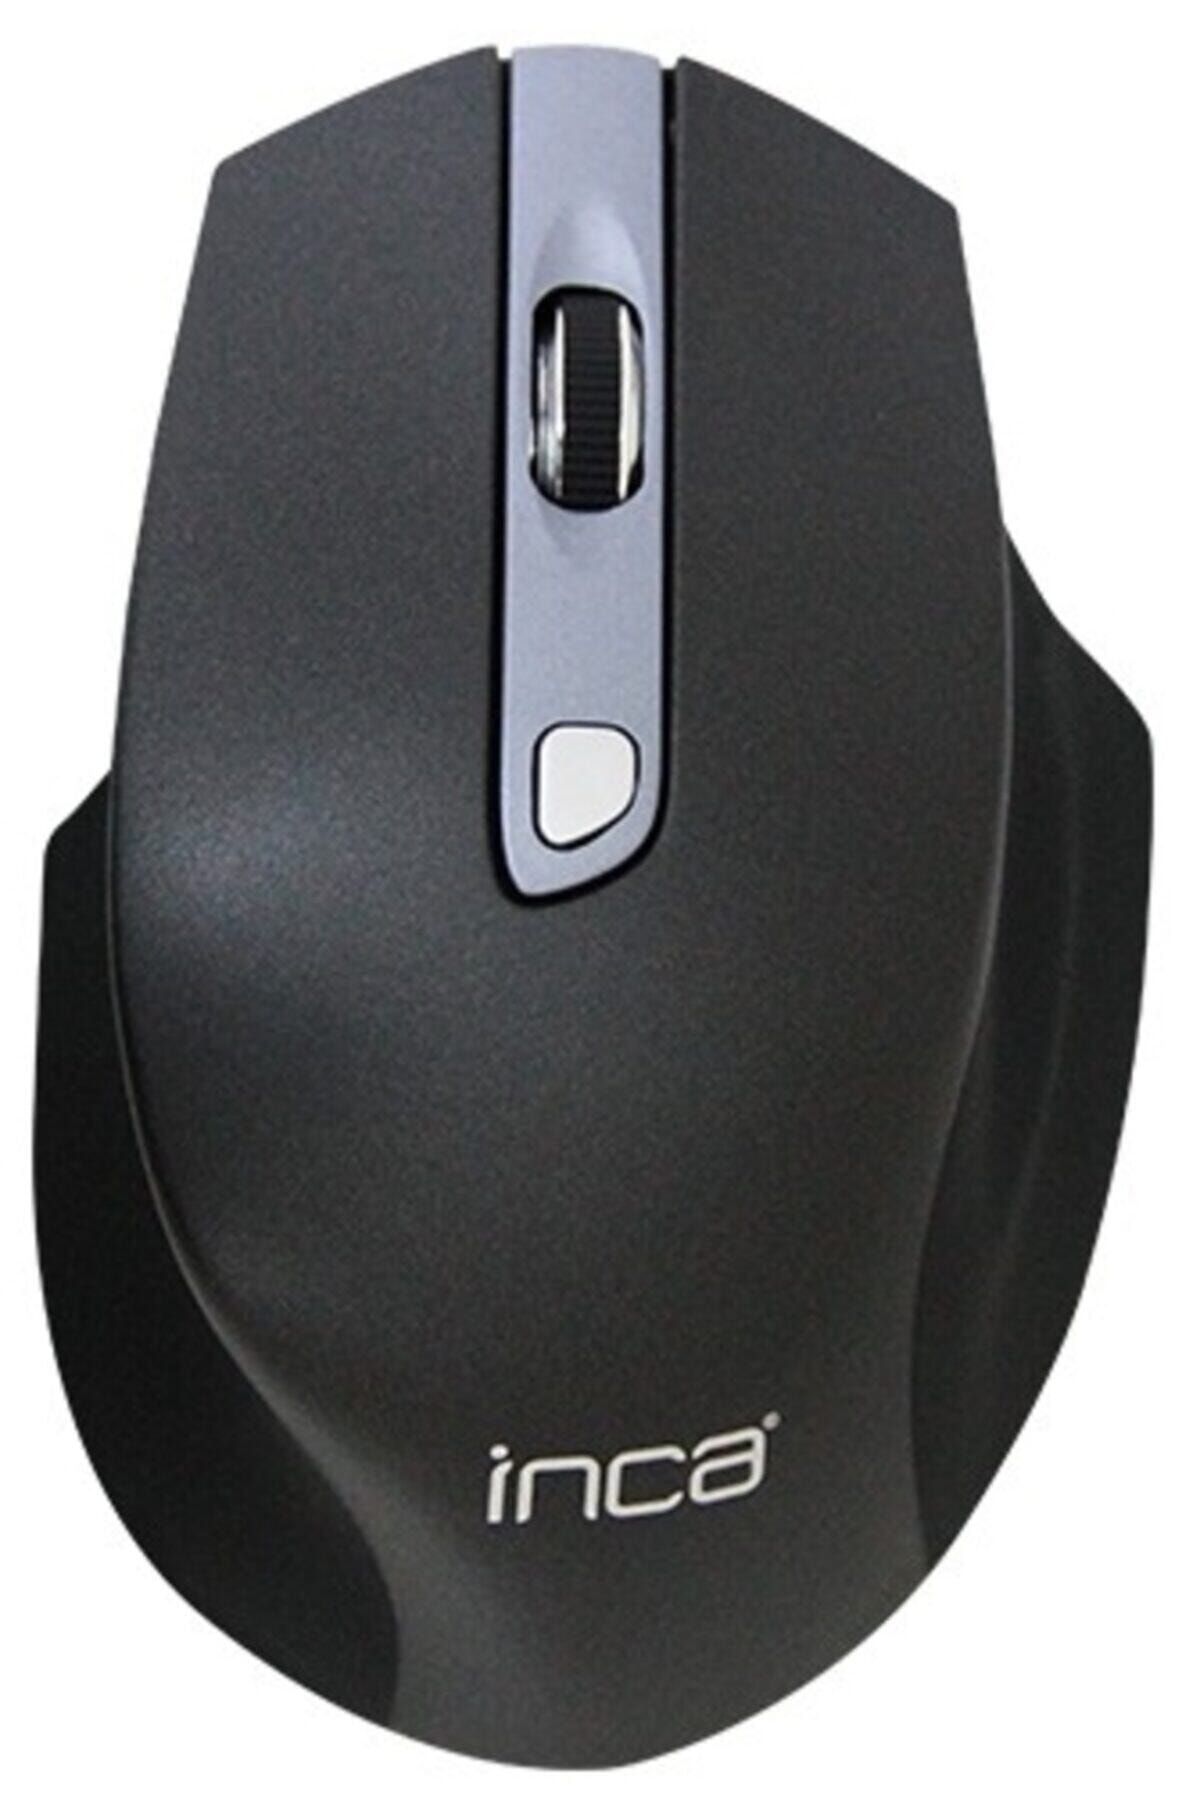 Inca Ivm-515 1300-3600 High Dpi Low Power Laser Wireless Mouse